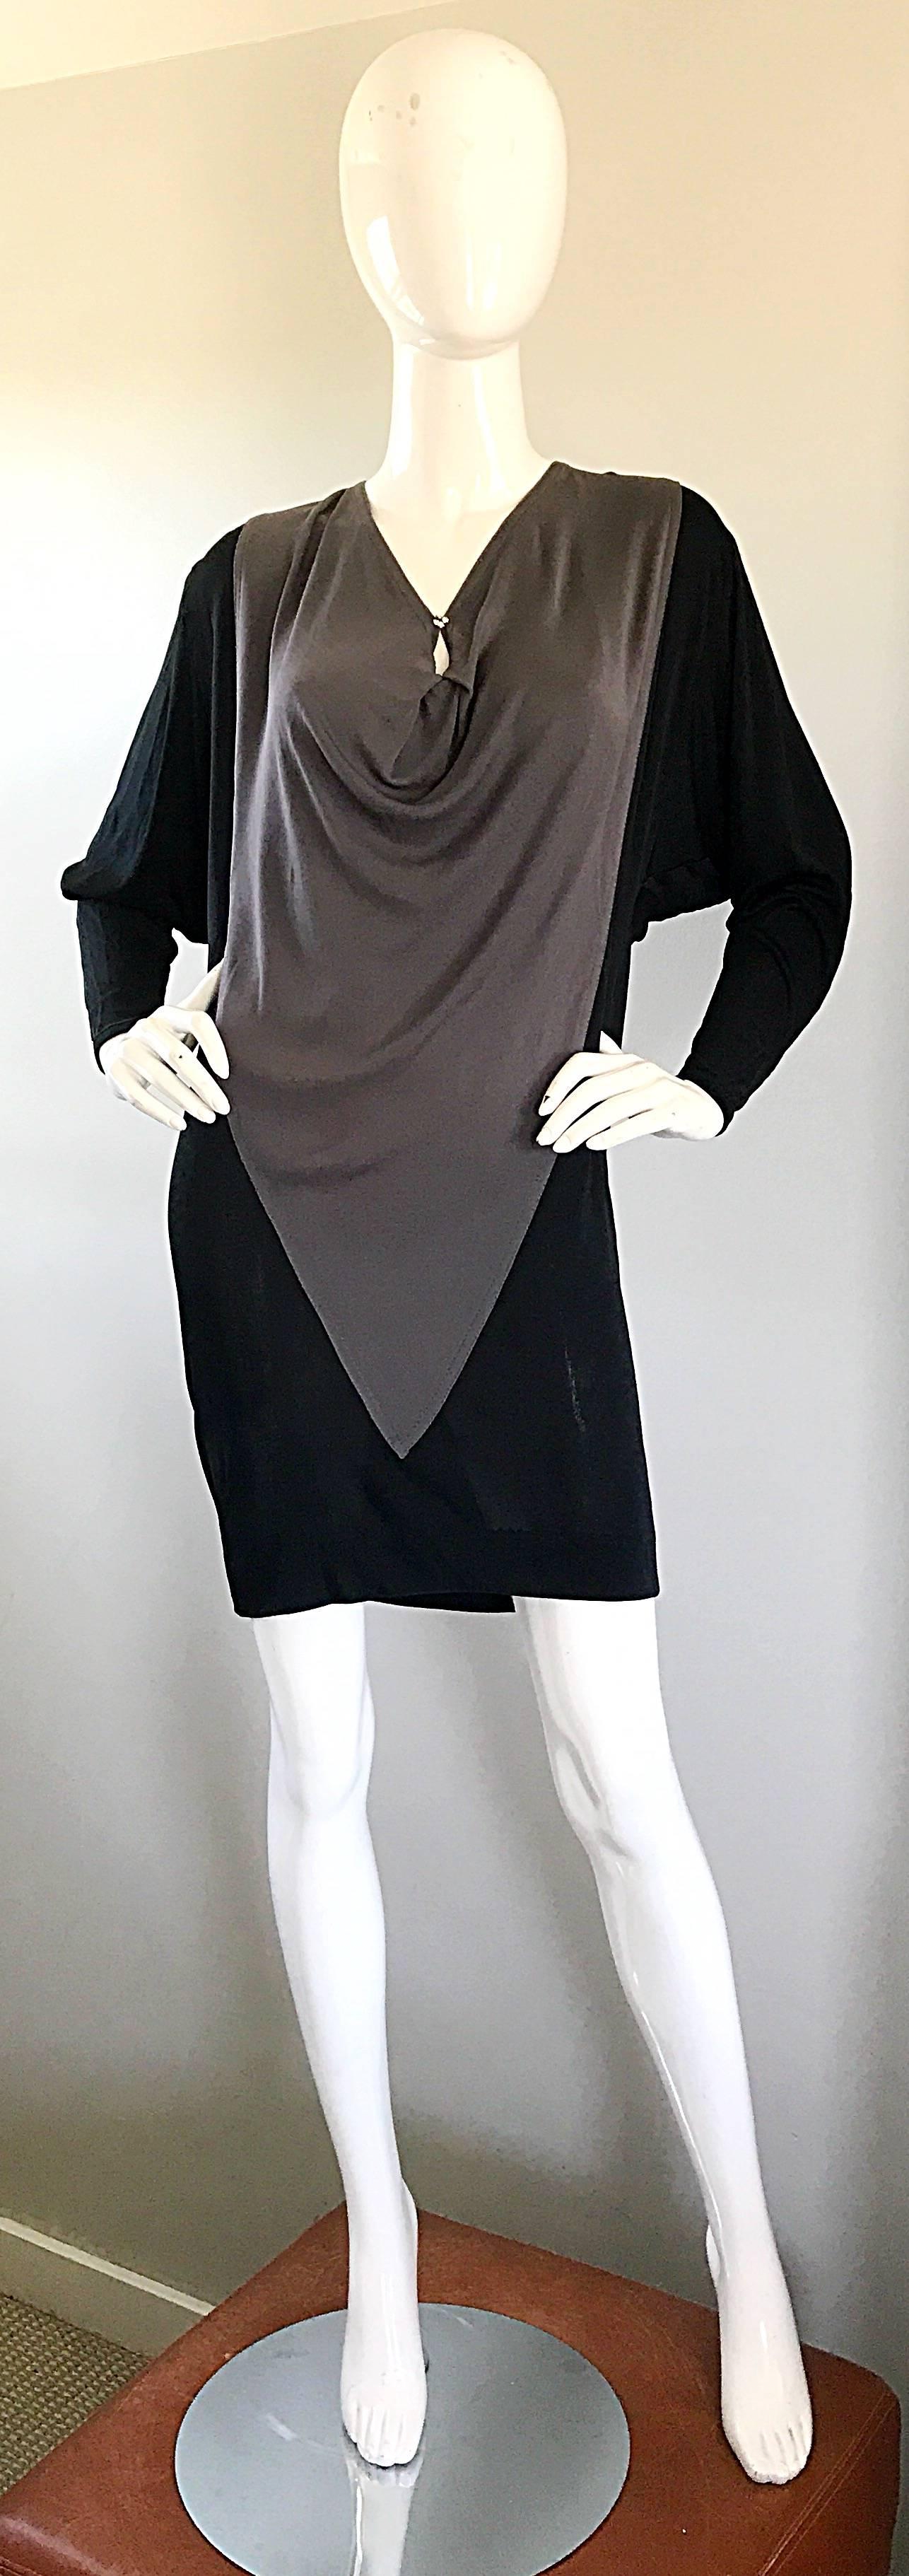 Chic vintage C.D Greene late 90s black and grey color block rayon jersey dress! Chic slouchy flattering fit can accomodate an array of sizes. Features a peek-a-boo back with ties that have rhinestone balls at the end of each string. Matching